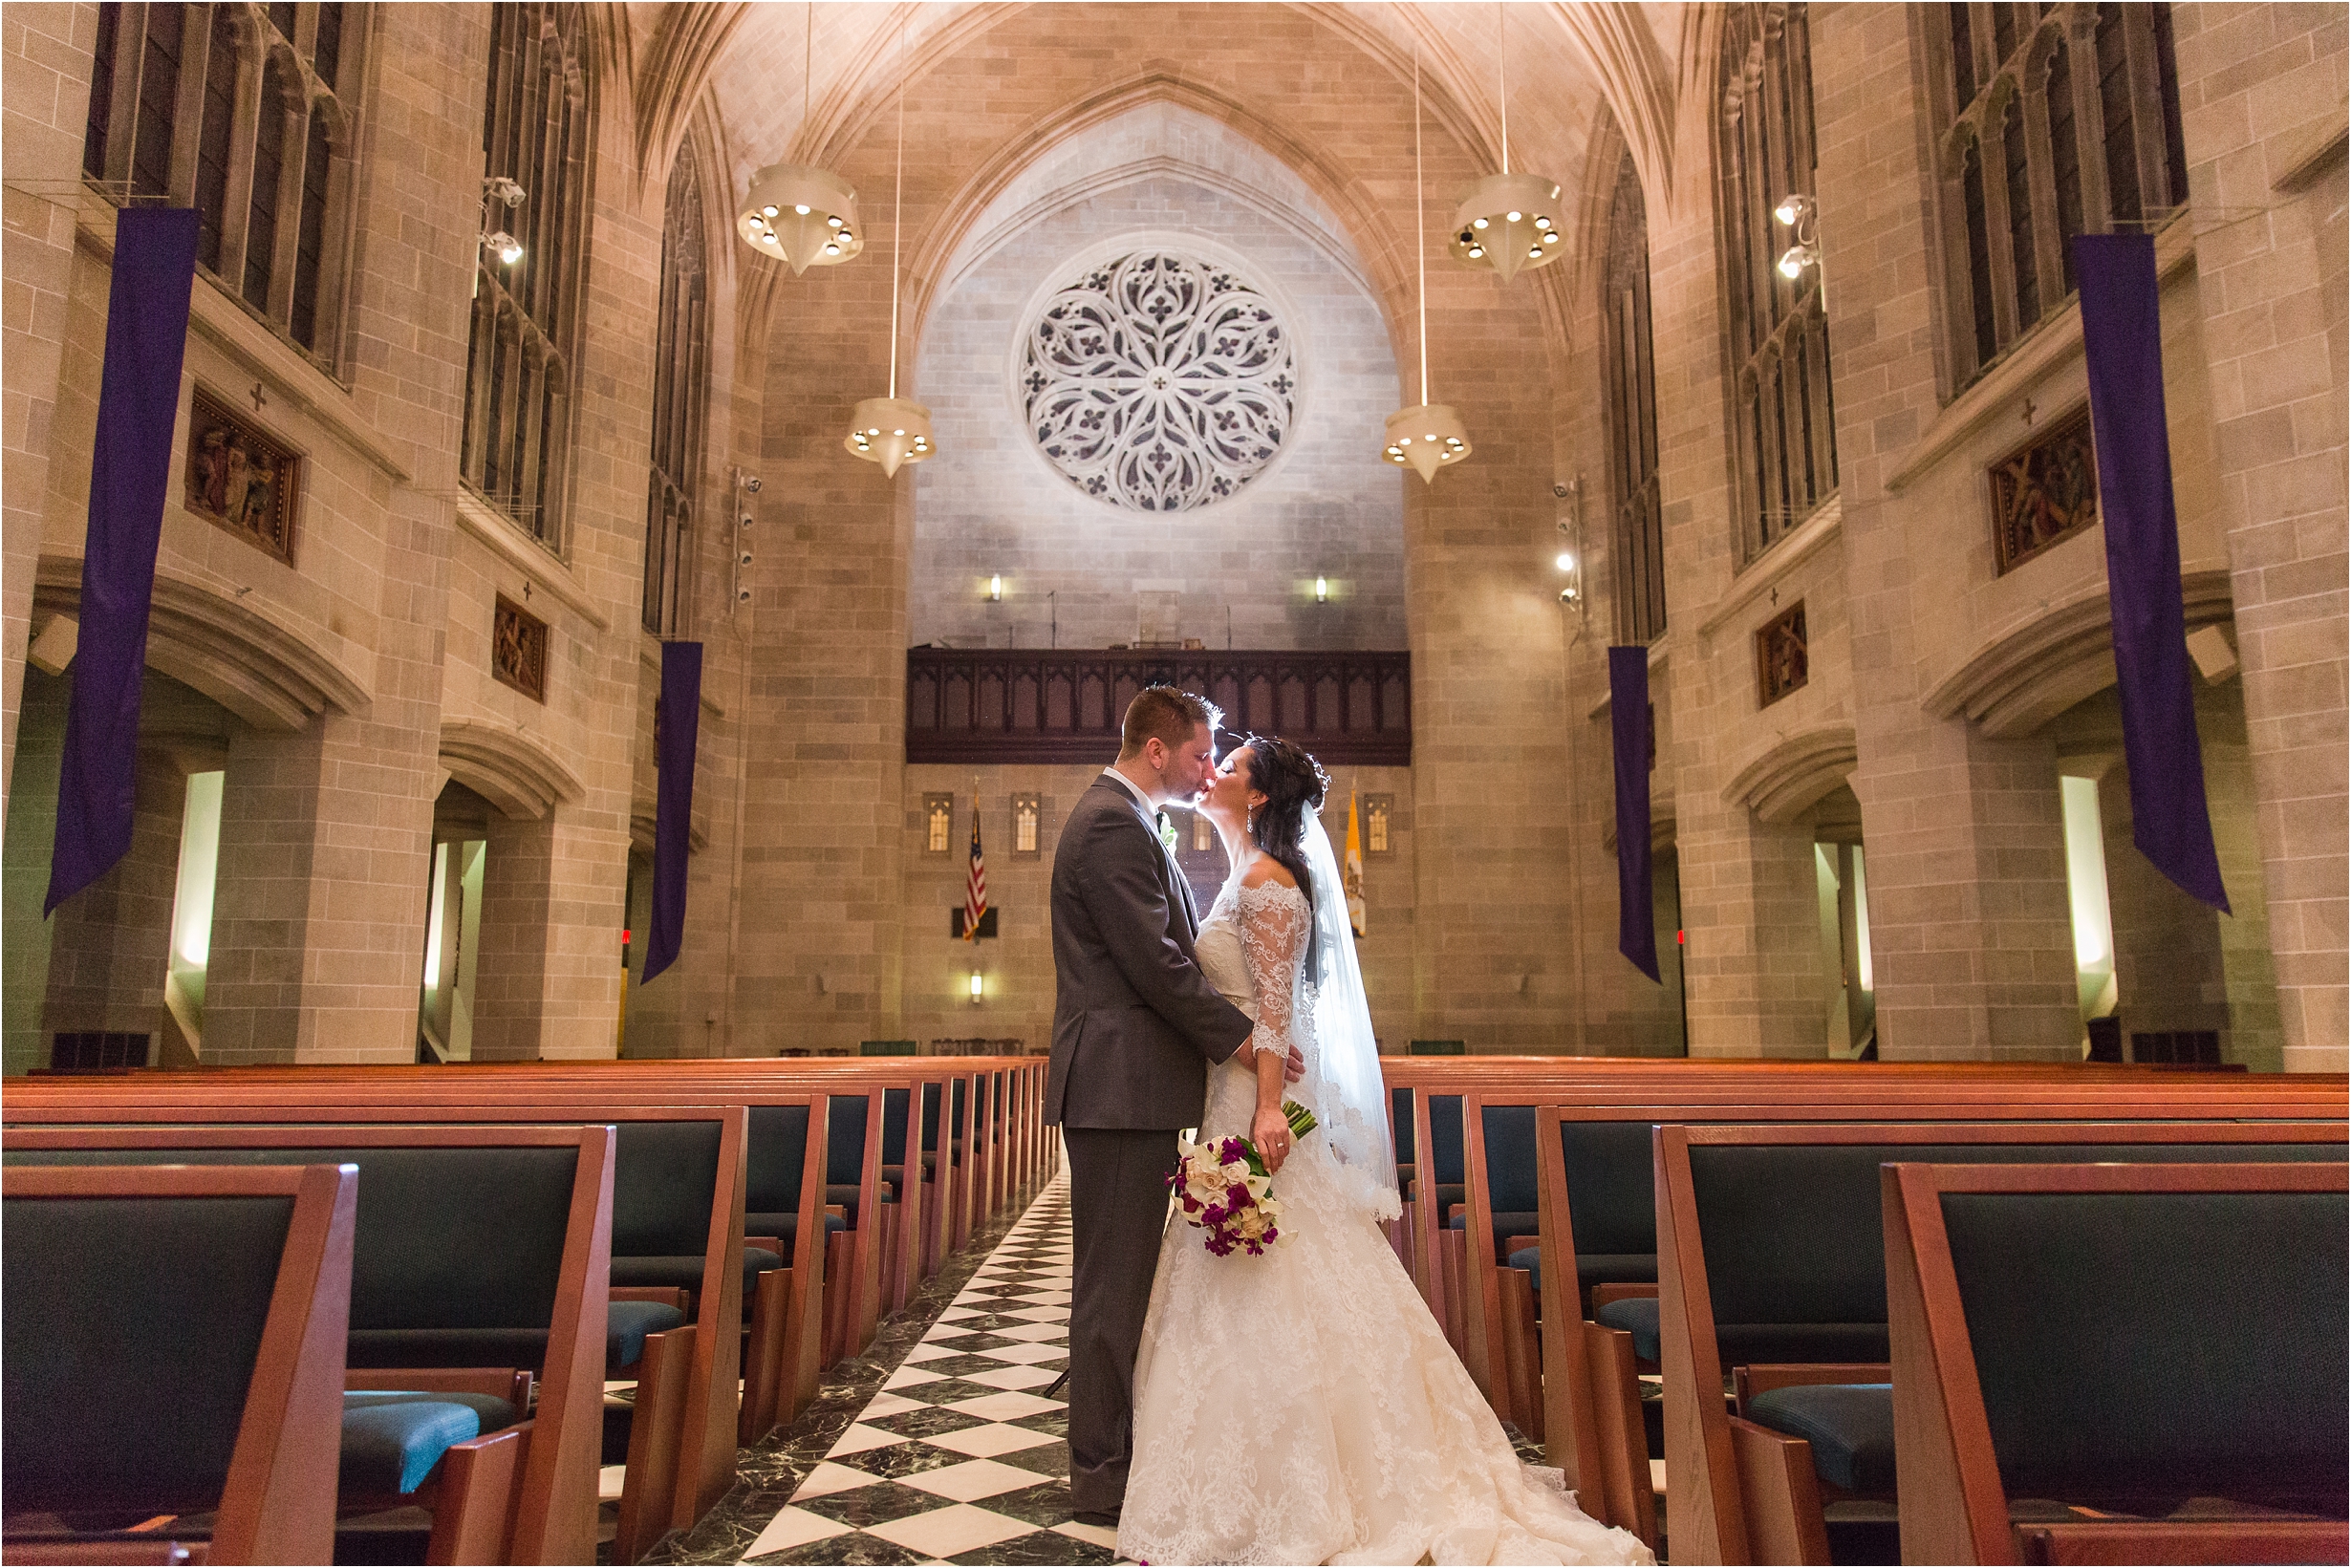 romantic-timeless-candid-wedding-photos-at-the-cathedral-of-the-most-blessed-sacrament-in-detroit-mi-by-courtney-carolyn-photography_0002.jpg